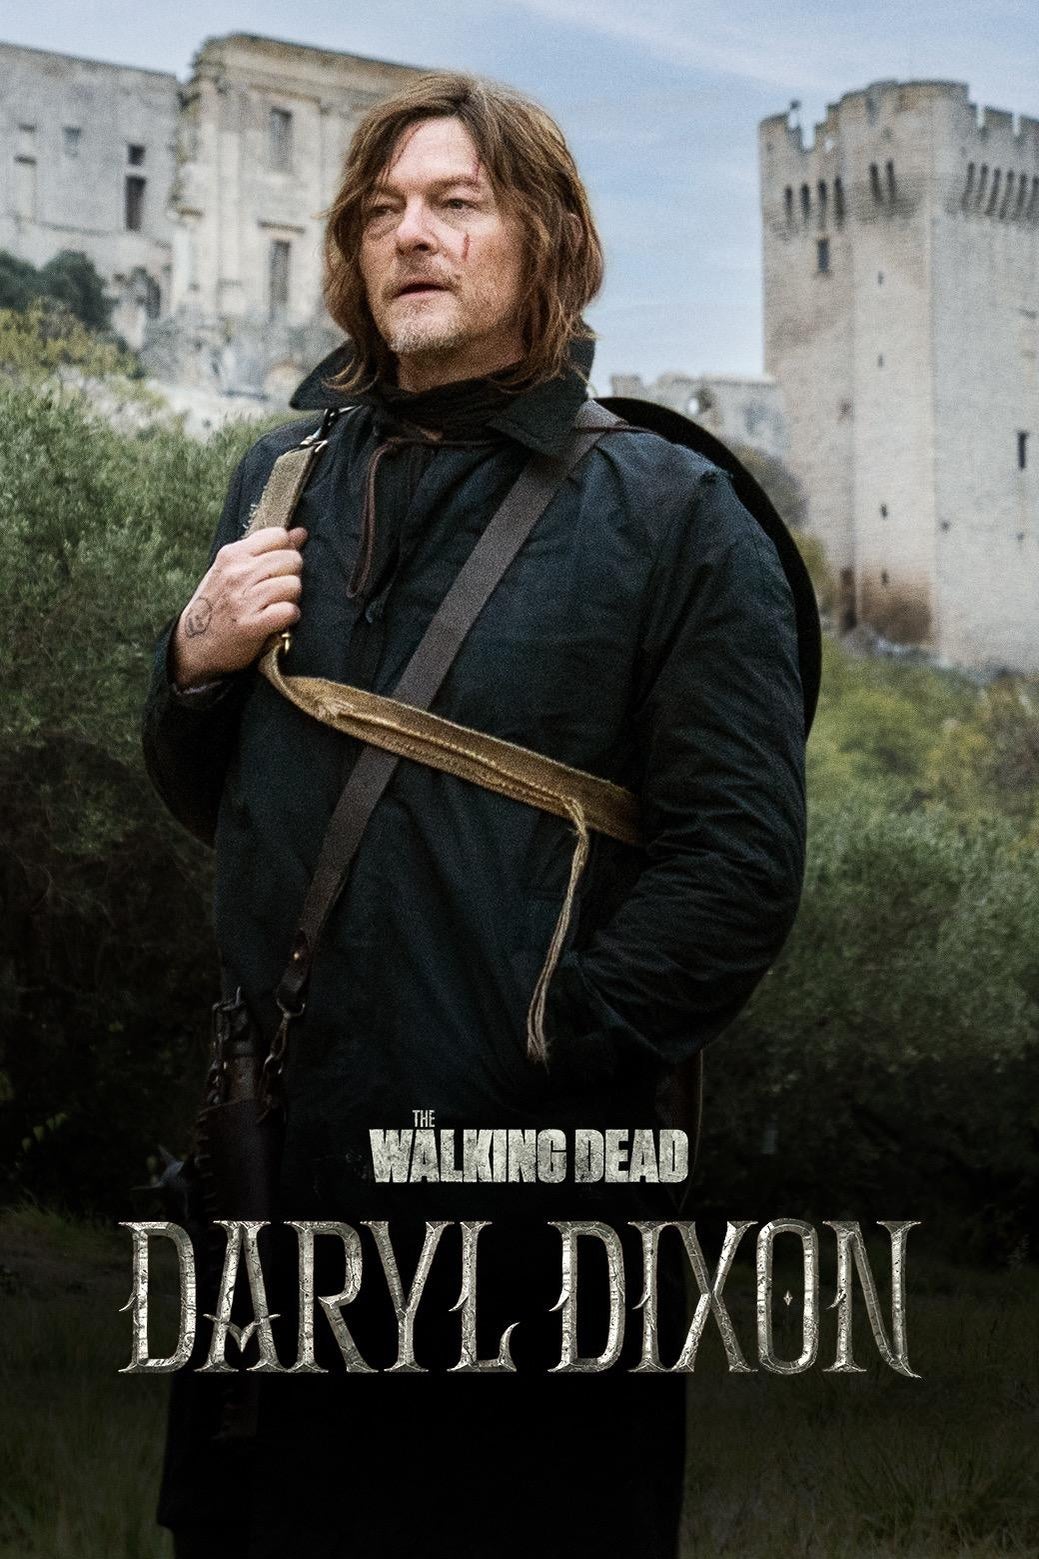 Daryl Dixon – Posters – The Walking Dead Shop